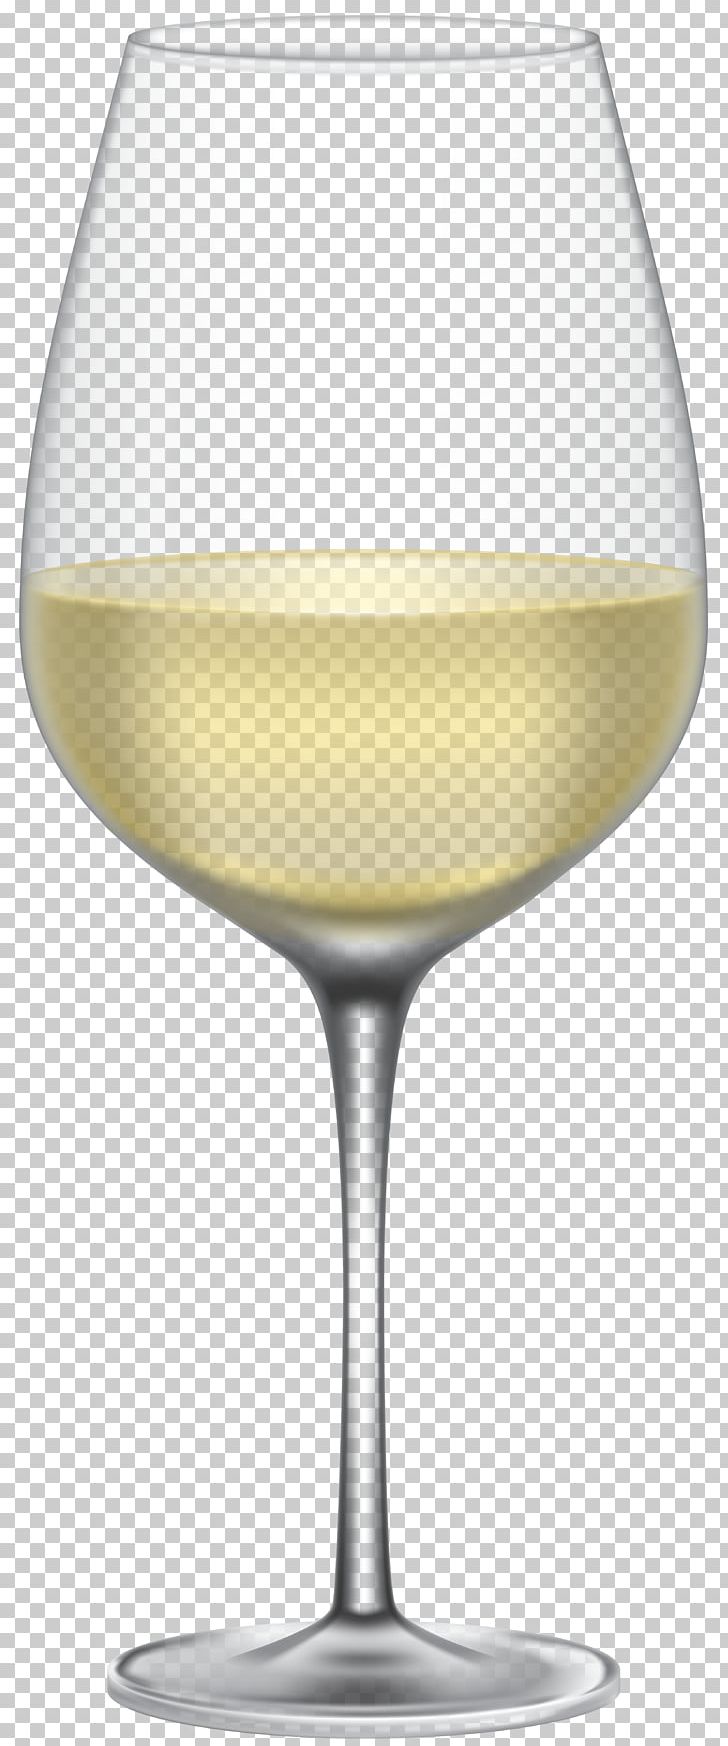 Wine Glass Champagne White Wine PNG, Clipart, Alcoholic Drink, Beer Glass, Bottle, Champagne, Champagne Glass Free PNG Download